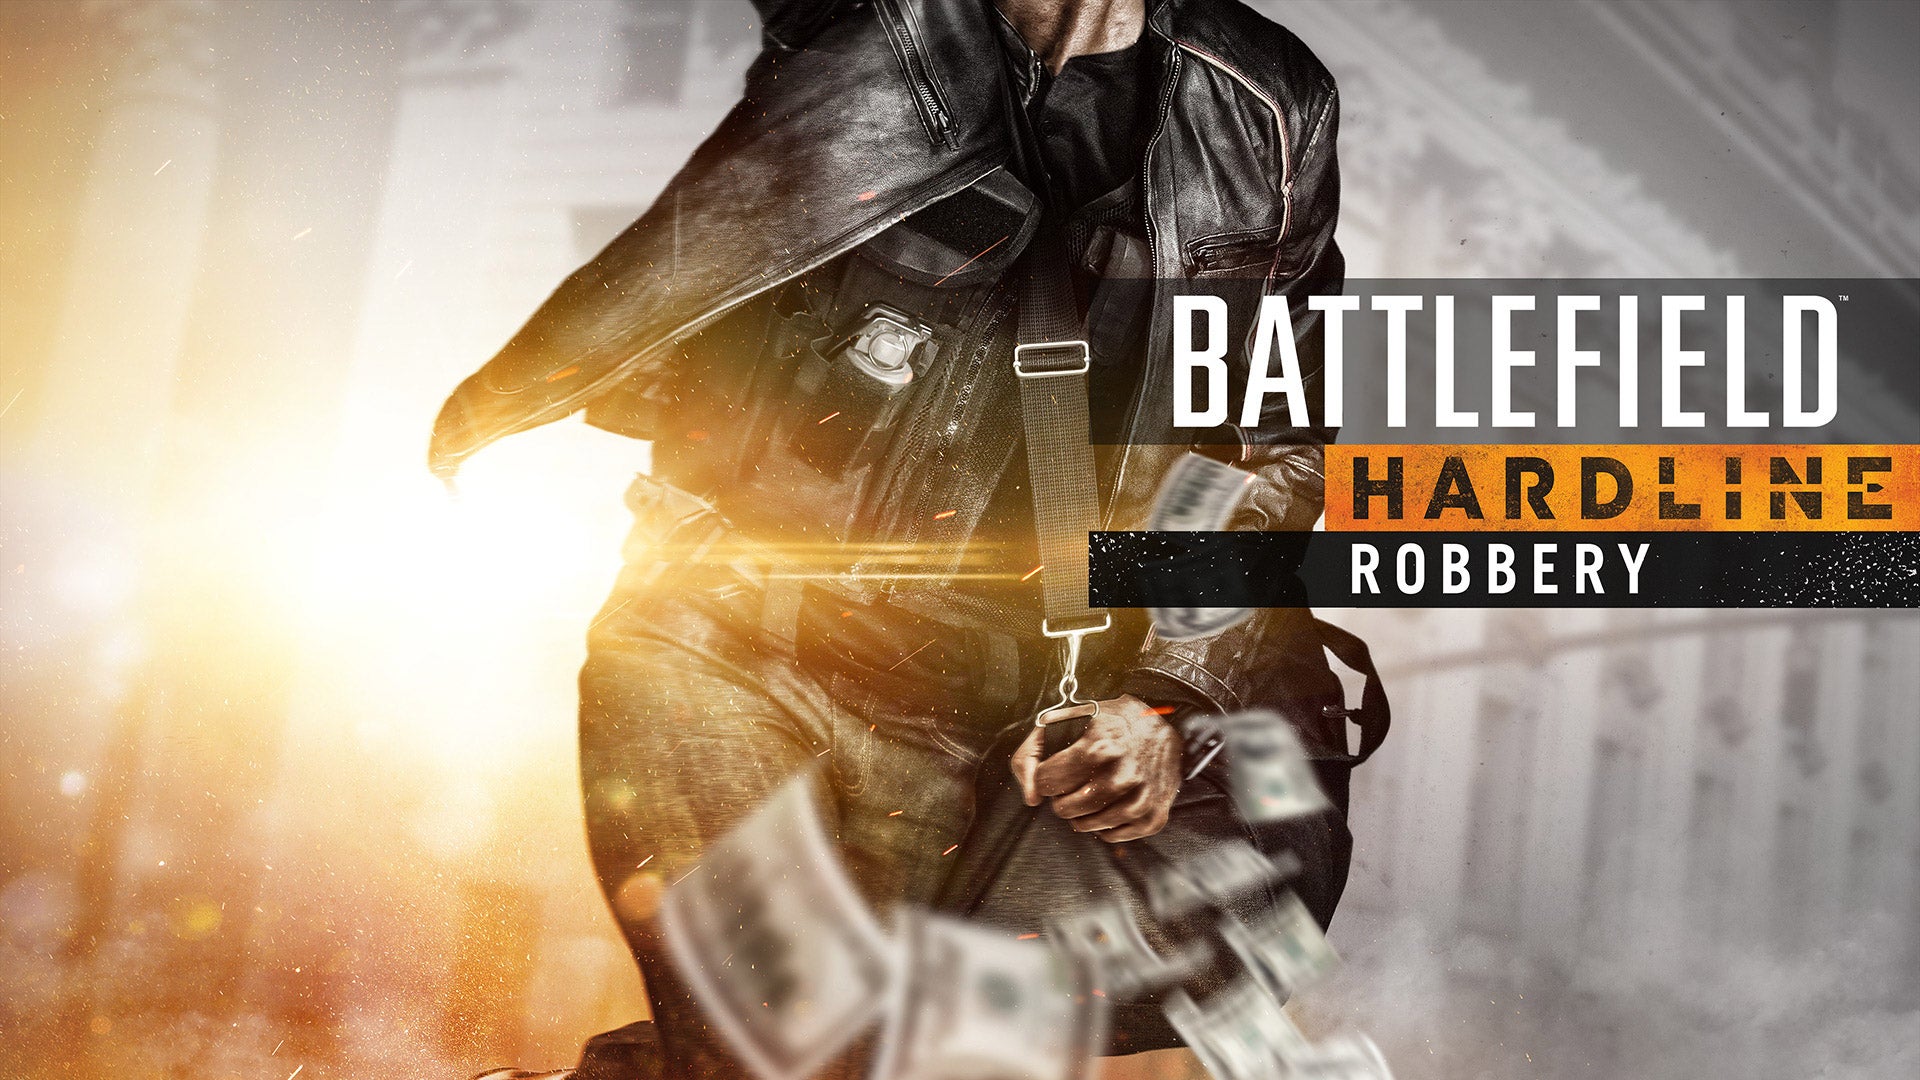 Image for Battlefield Hardline Robbery DLC revealed - is all about heisting